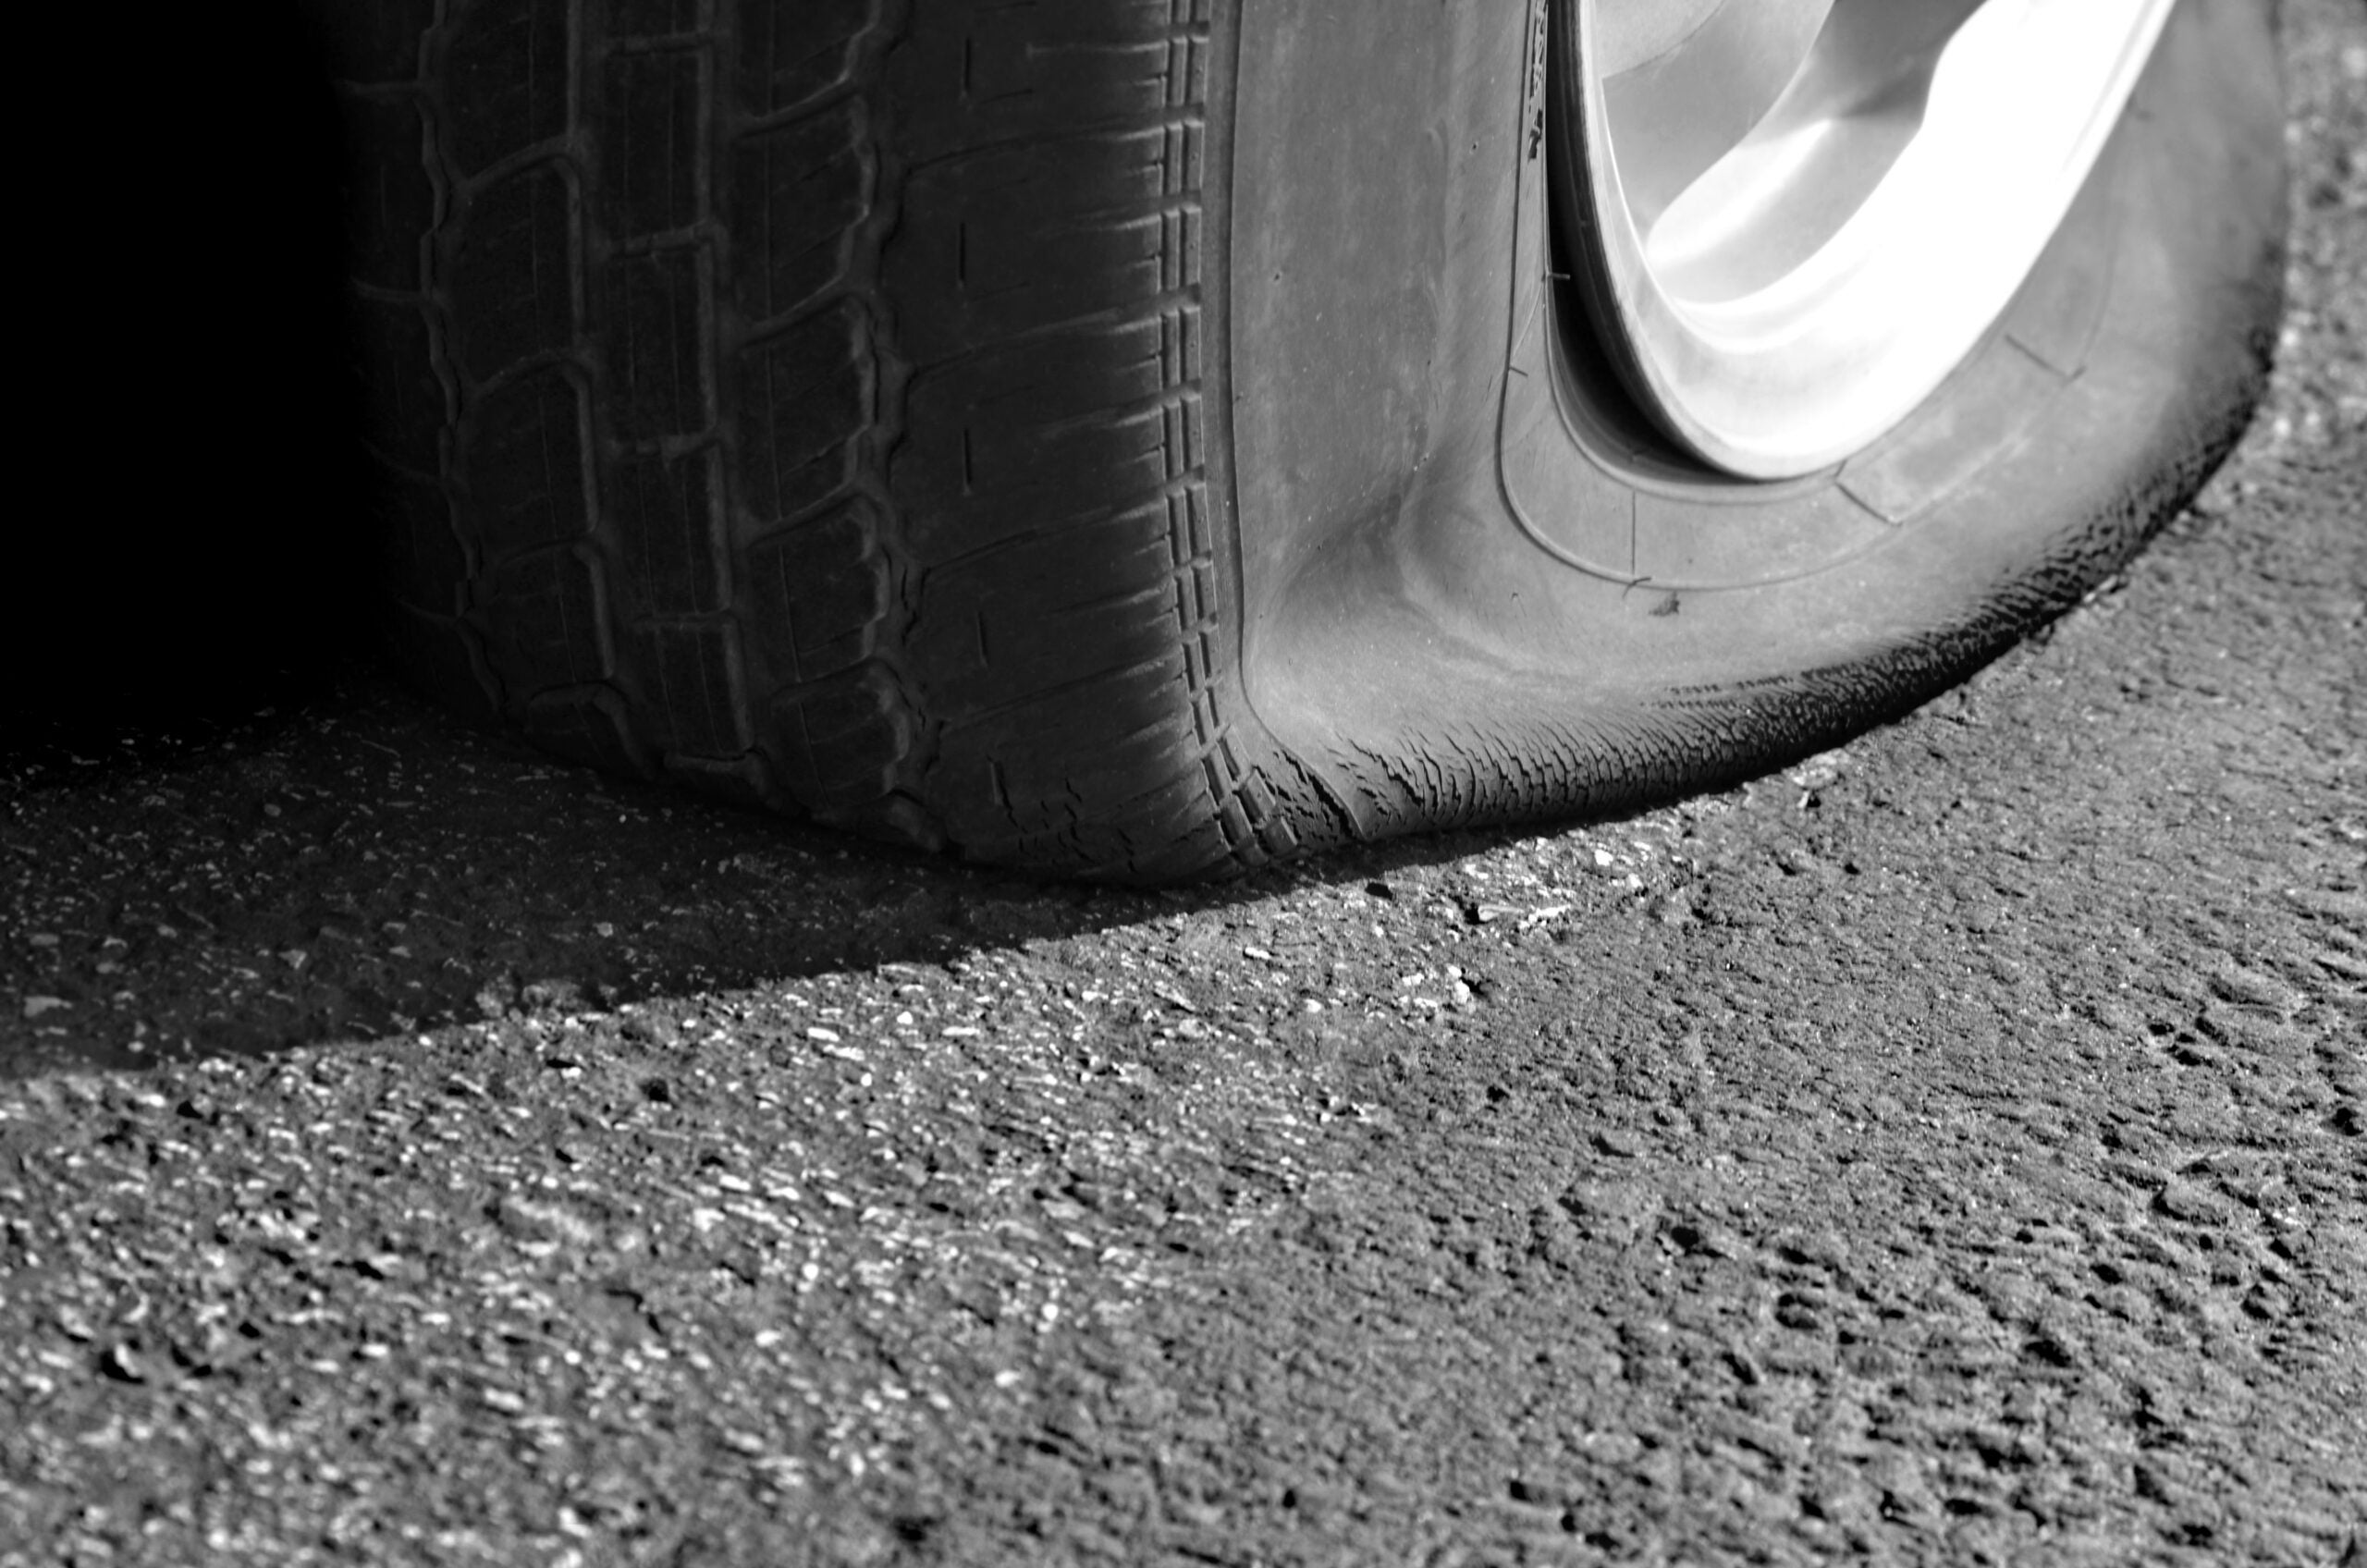 How far can you drive on a temporary spare after getting a flat tire? 